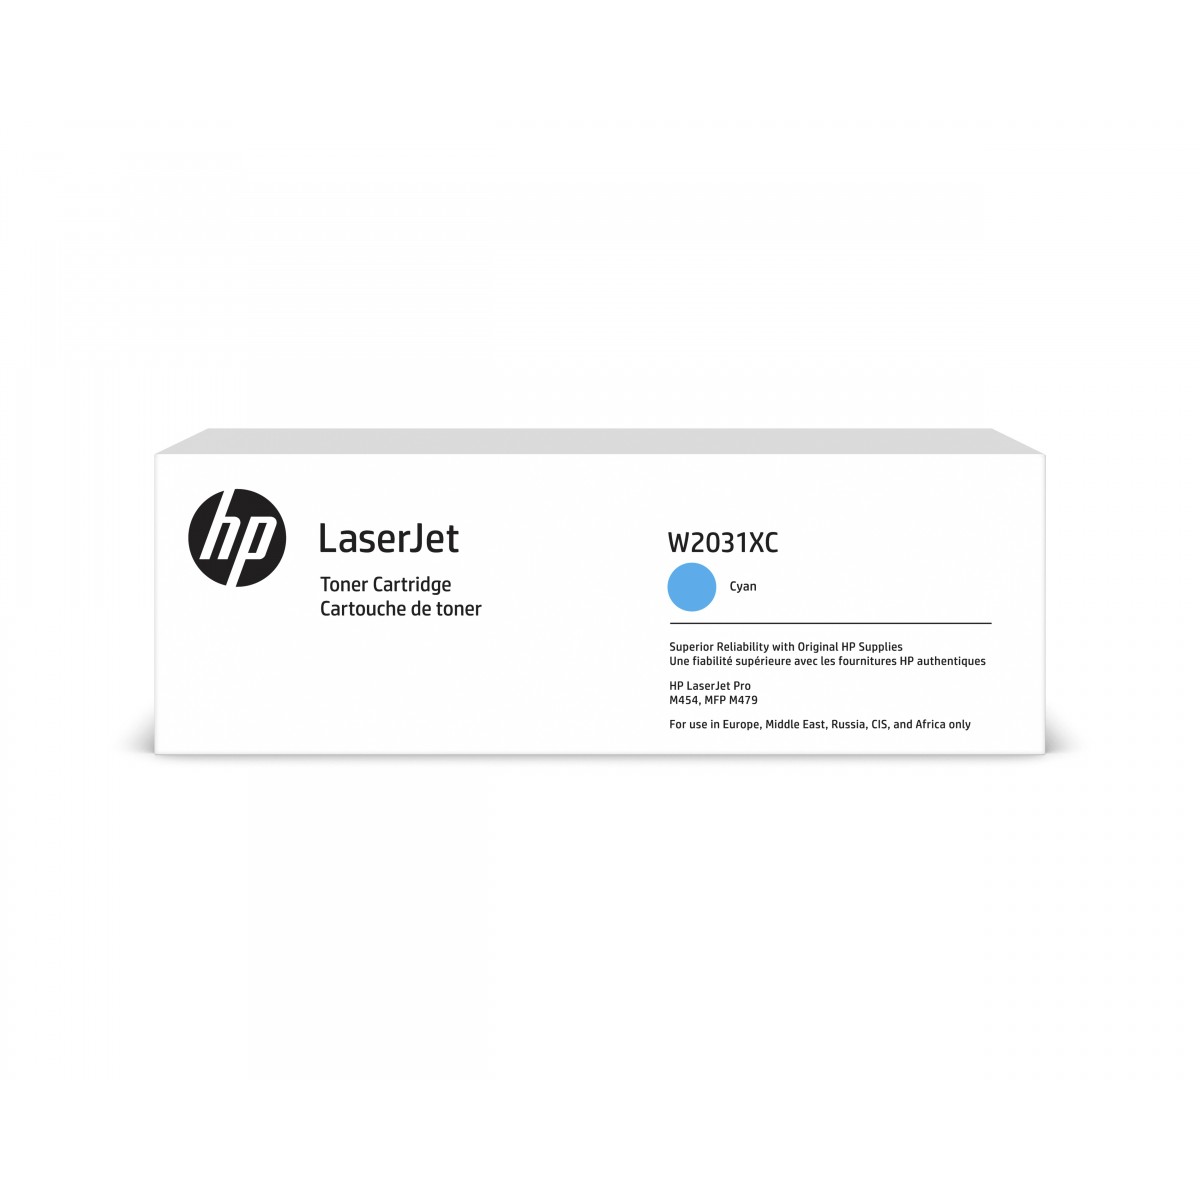 HP 415X Cyn Contract LaserJet Toner Crtg - 6000 pages - Cyan - 1 pc(s)